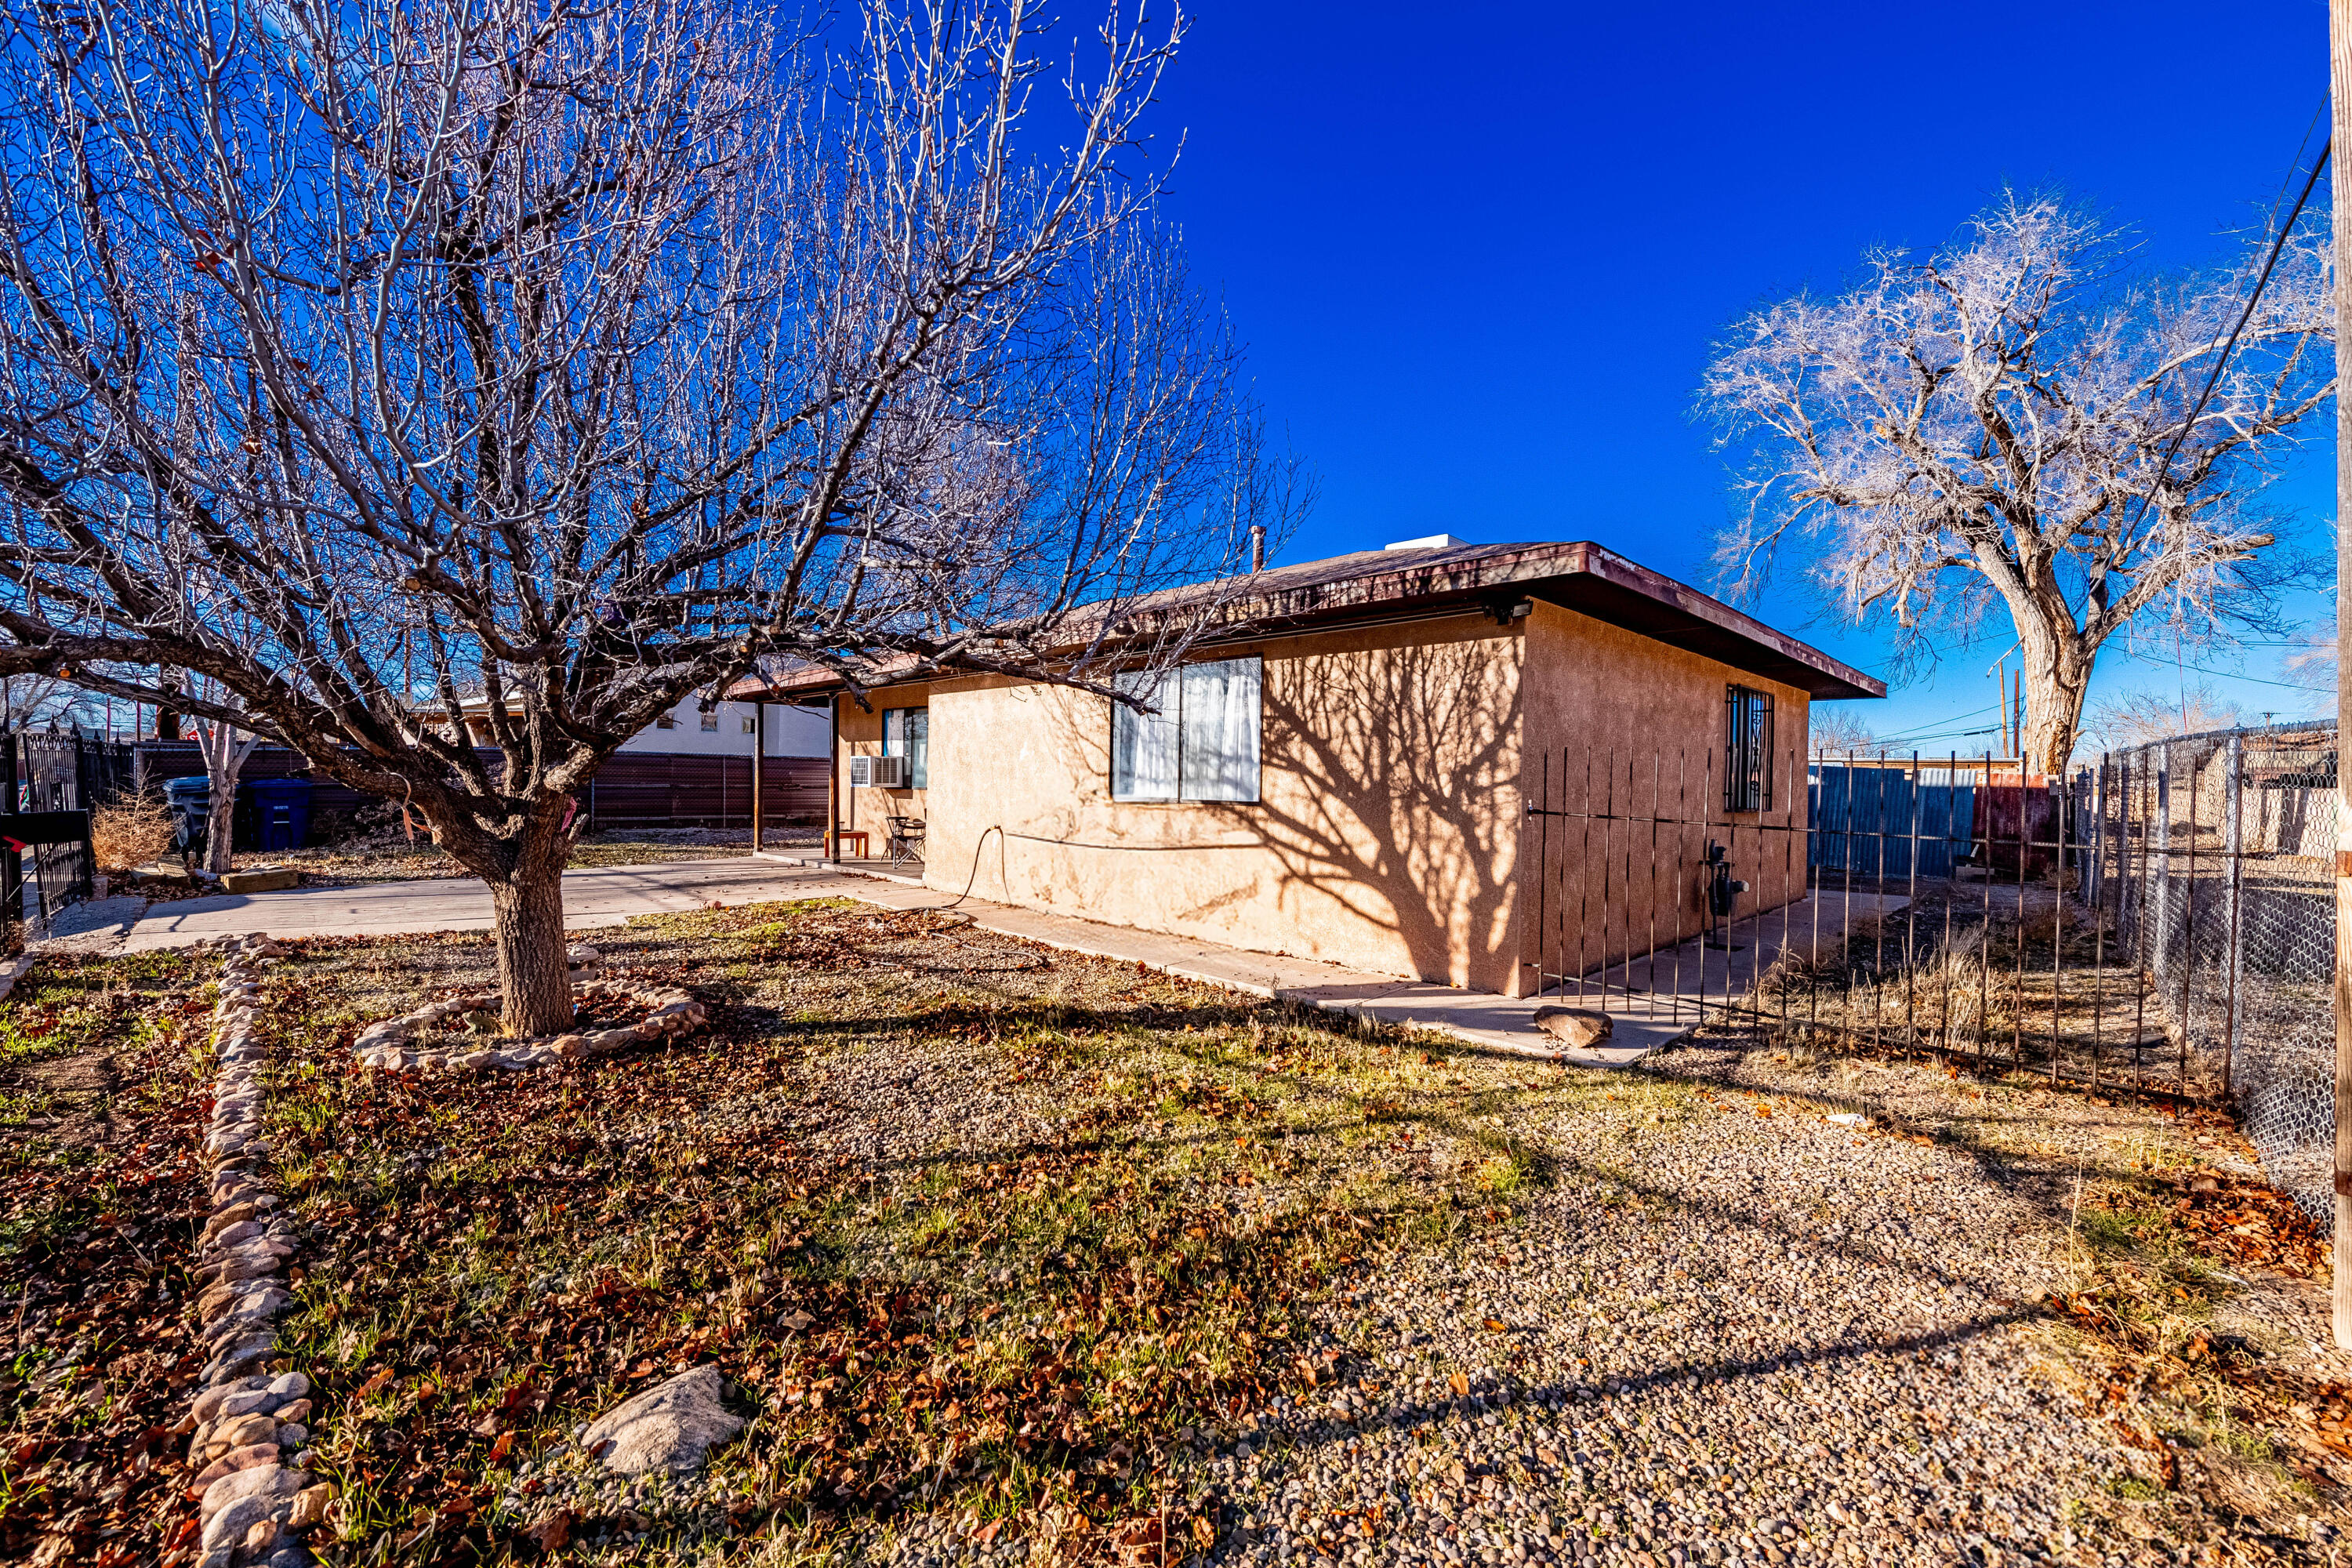 509 Bellrose Avenue NW, Albuquerque, New Mexico 87107, 2 Bedrooms Bedrooms, ,1 BathroomBathrooms,Residential,For Sale,509 Bellrose Avenue NW,1054796